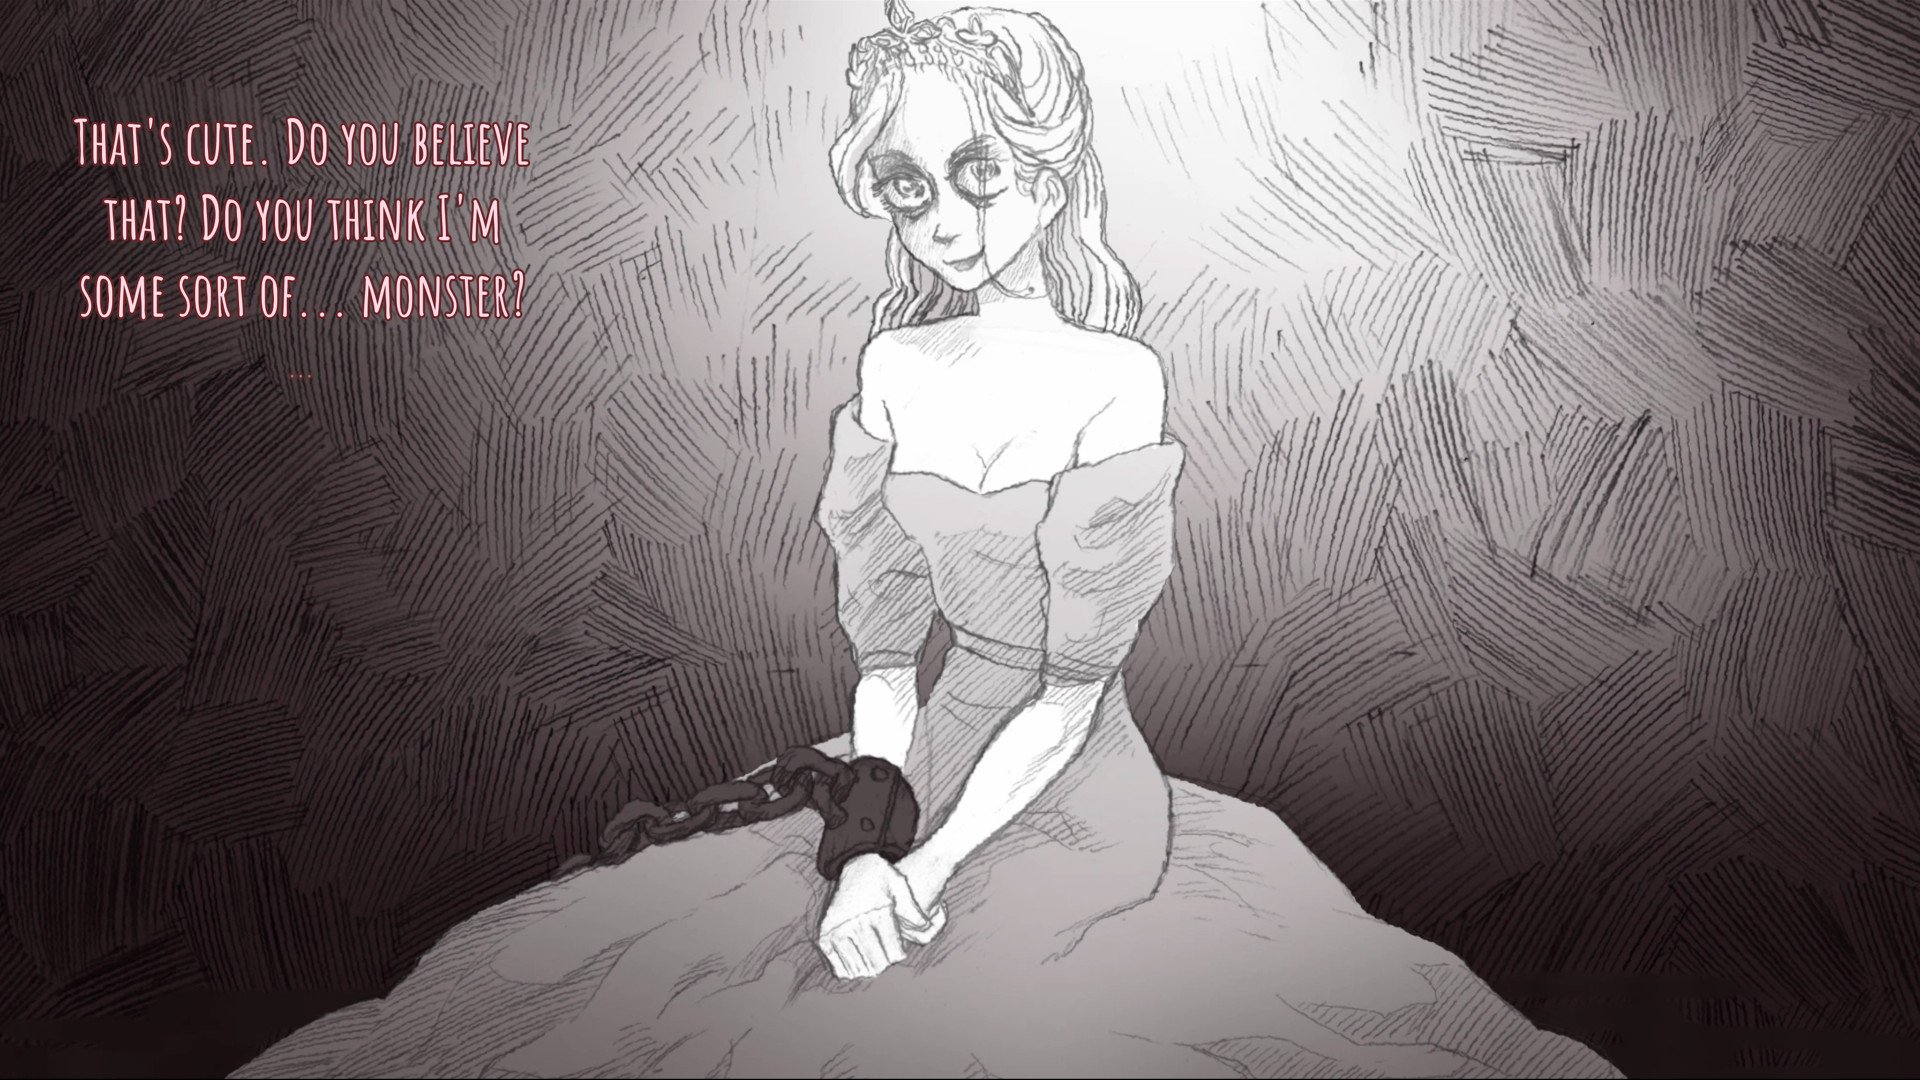 #Slay the Princess is a horror game about a very scary princess coming next year